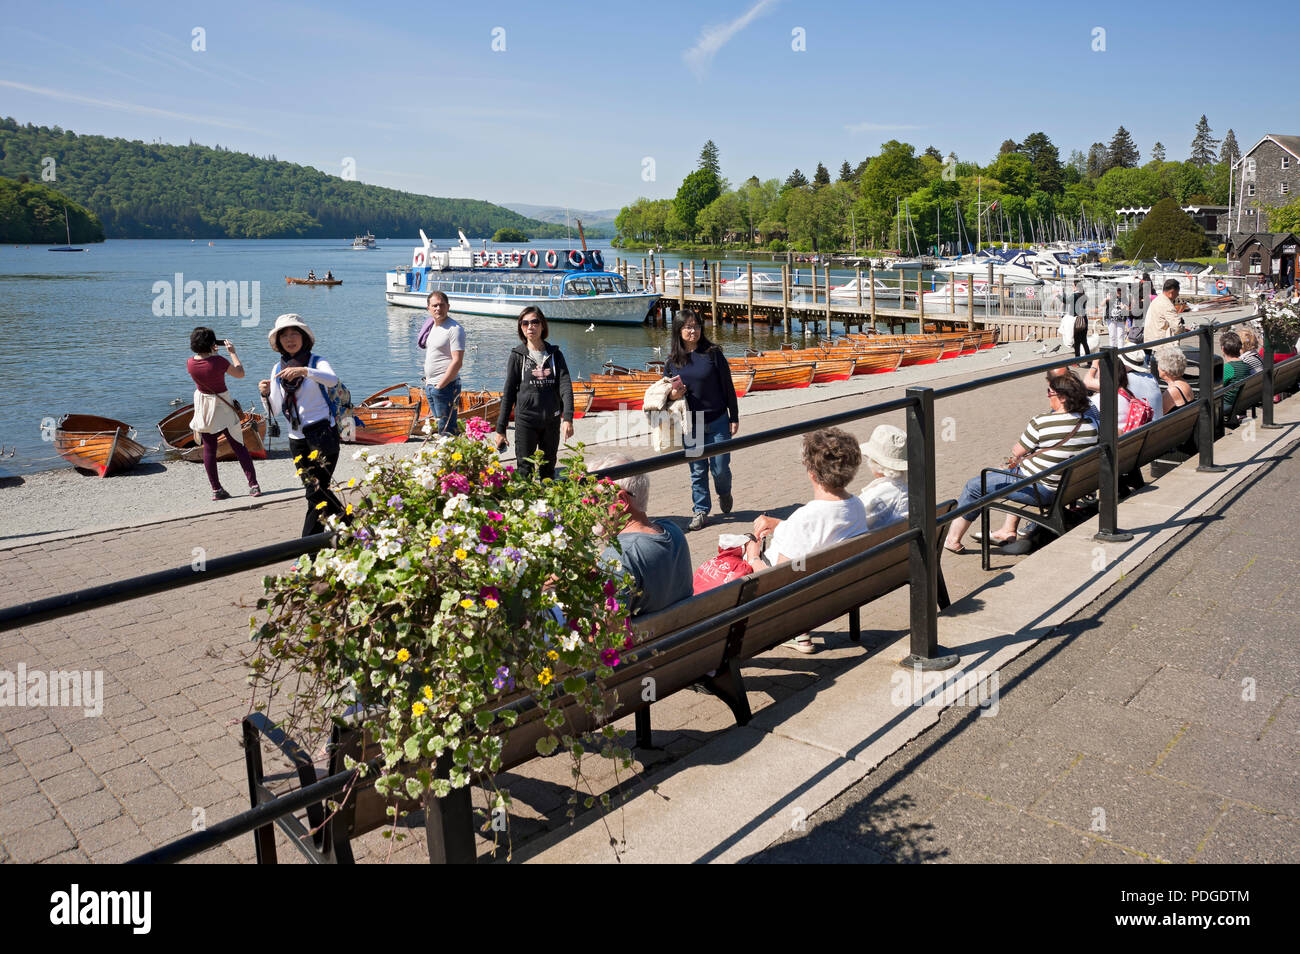 People tourists visitors by the lake in summer Bowness on Windermere Lake District National Park Cumbria England UK United Kingdom GB Great Britain Stock Photo